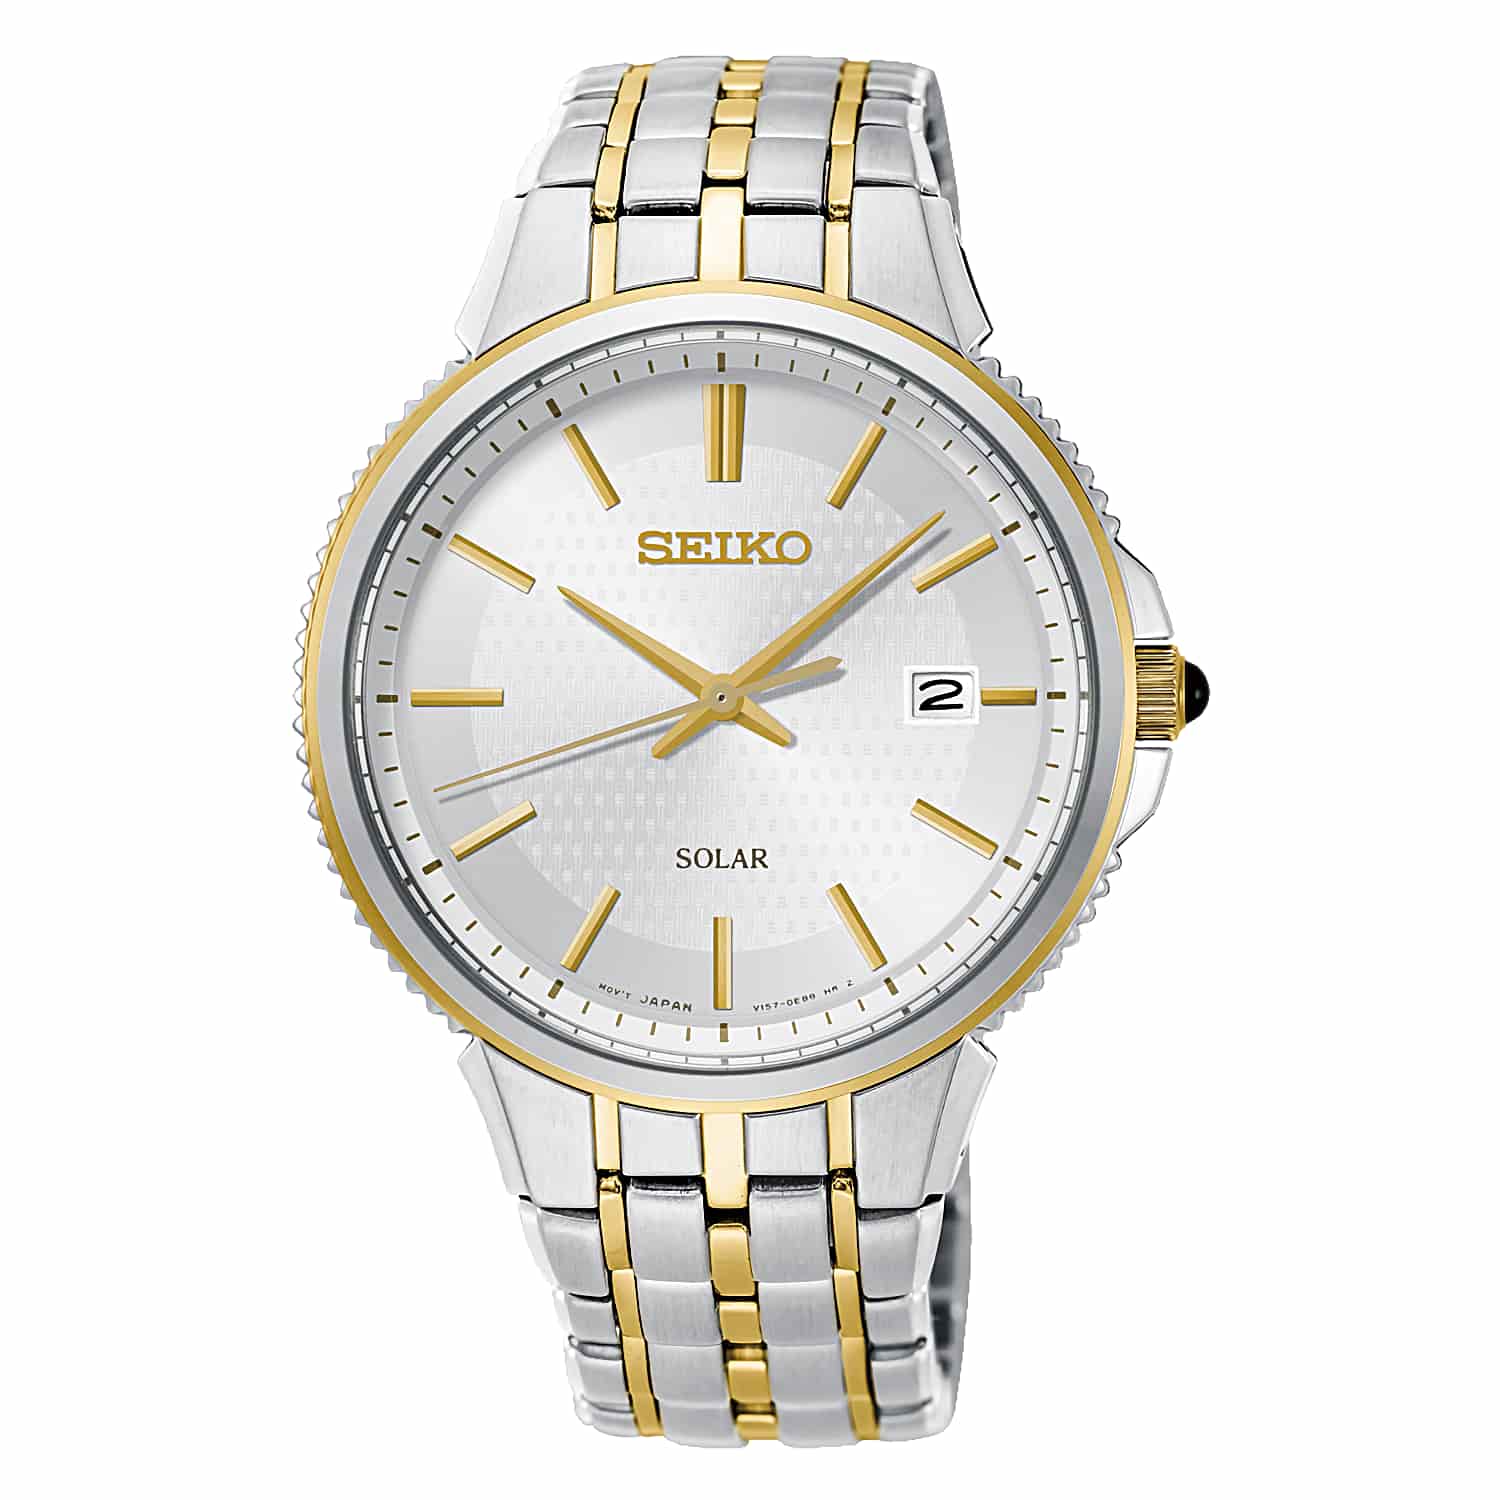 SNE508P SEIKO Gents Watch. SSNE508P SEIKO Solar Watch Humm -Buy Little things up to $1000 and choose 10 weekly or 5 fortnightly payments with no interest. Late payment fee of $10 will apply. LAYBUY - Pay it easy, in 6 weekly @christies.online